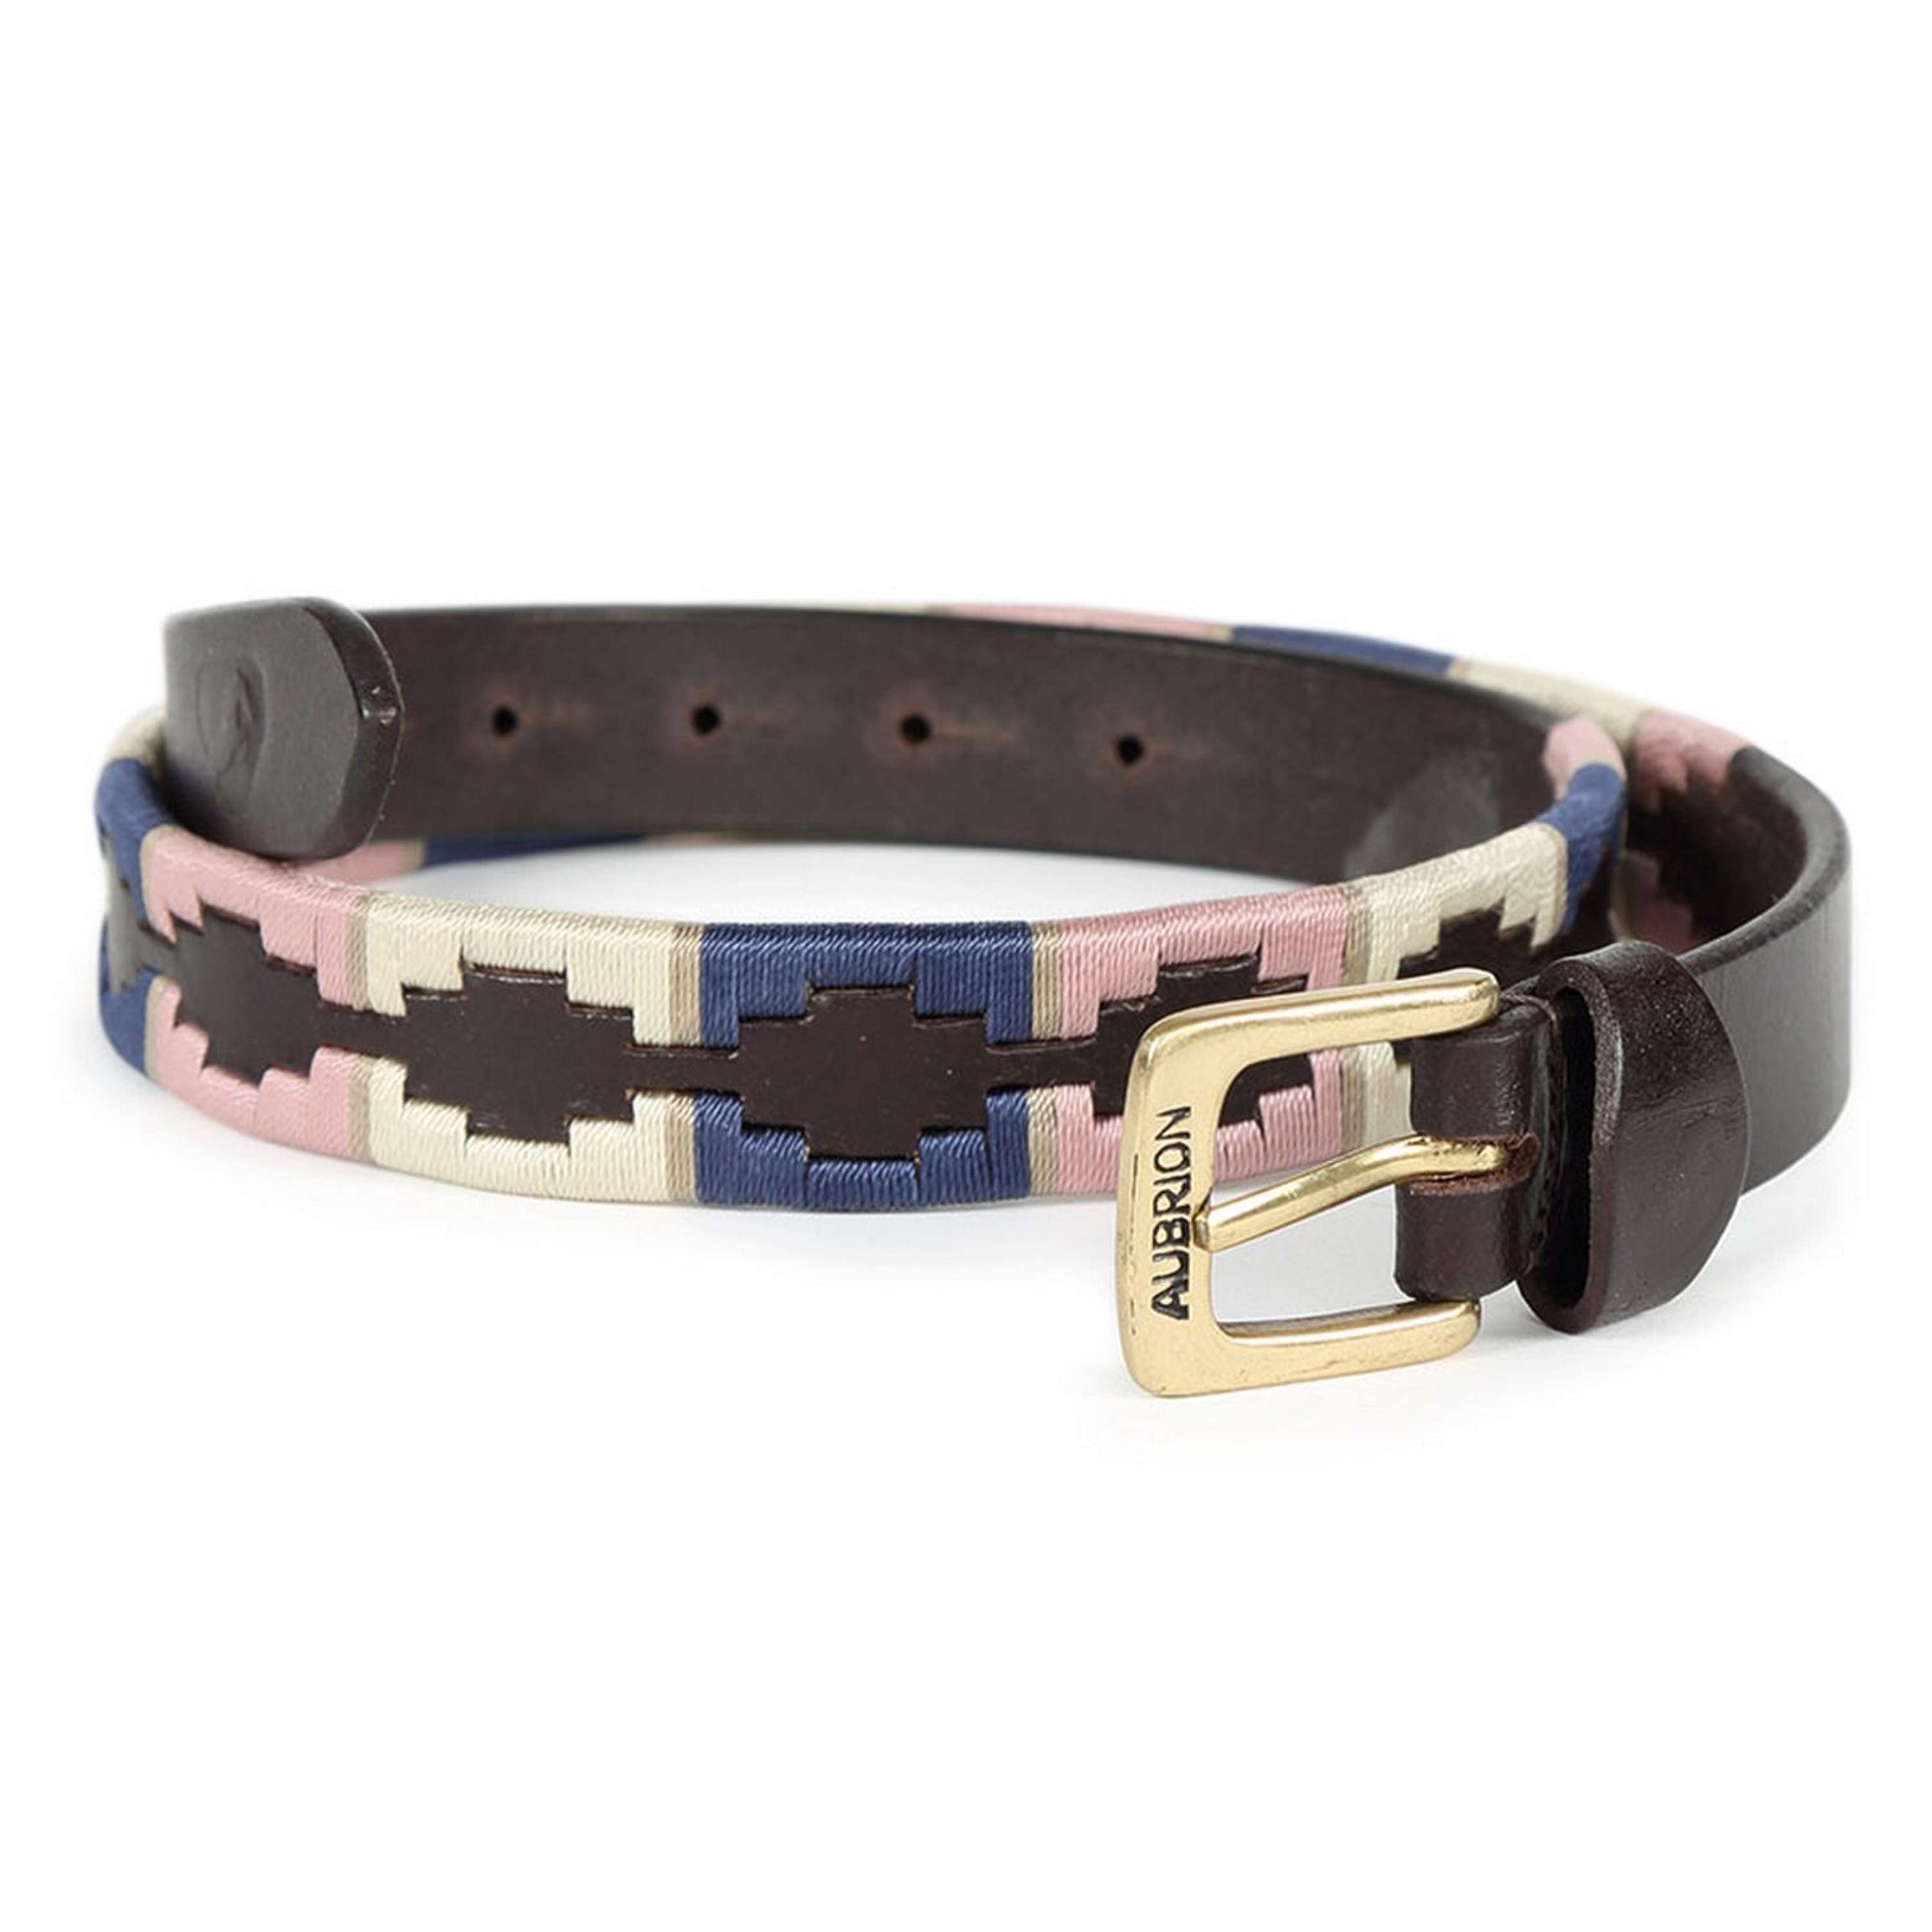 Aubrion by Shires Ceinture Skinny Polo Marine/Pink/Naturel